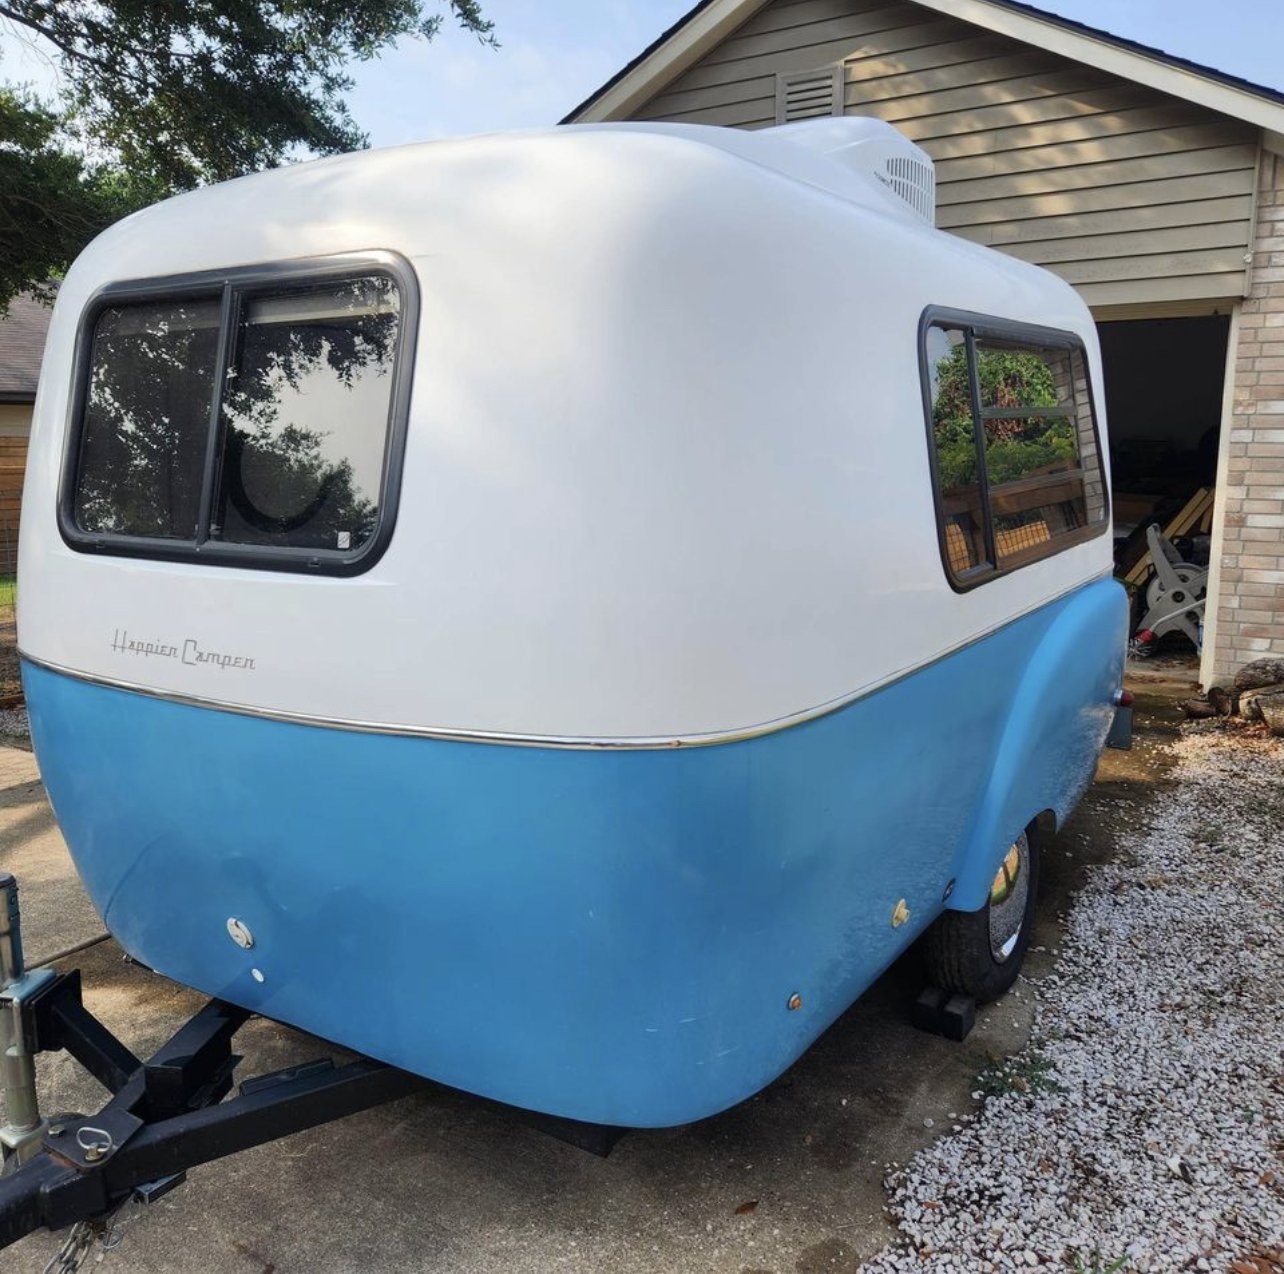 Happier Campers for Sale by Owner — Happier Camper Owners